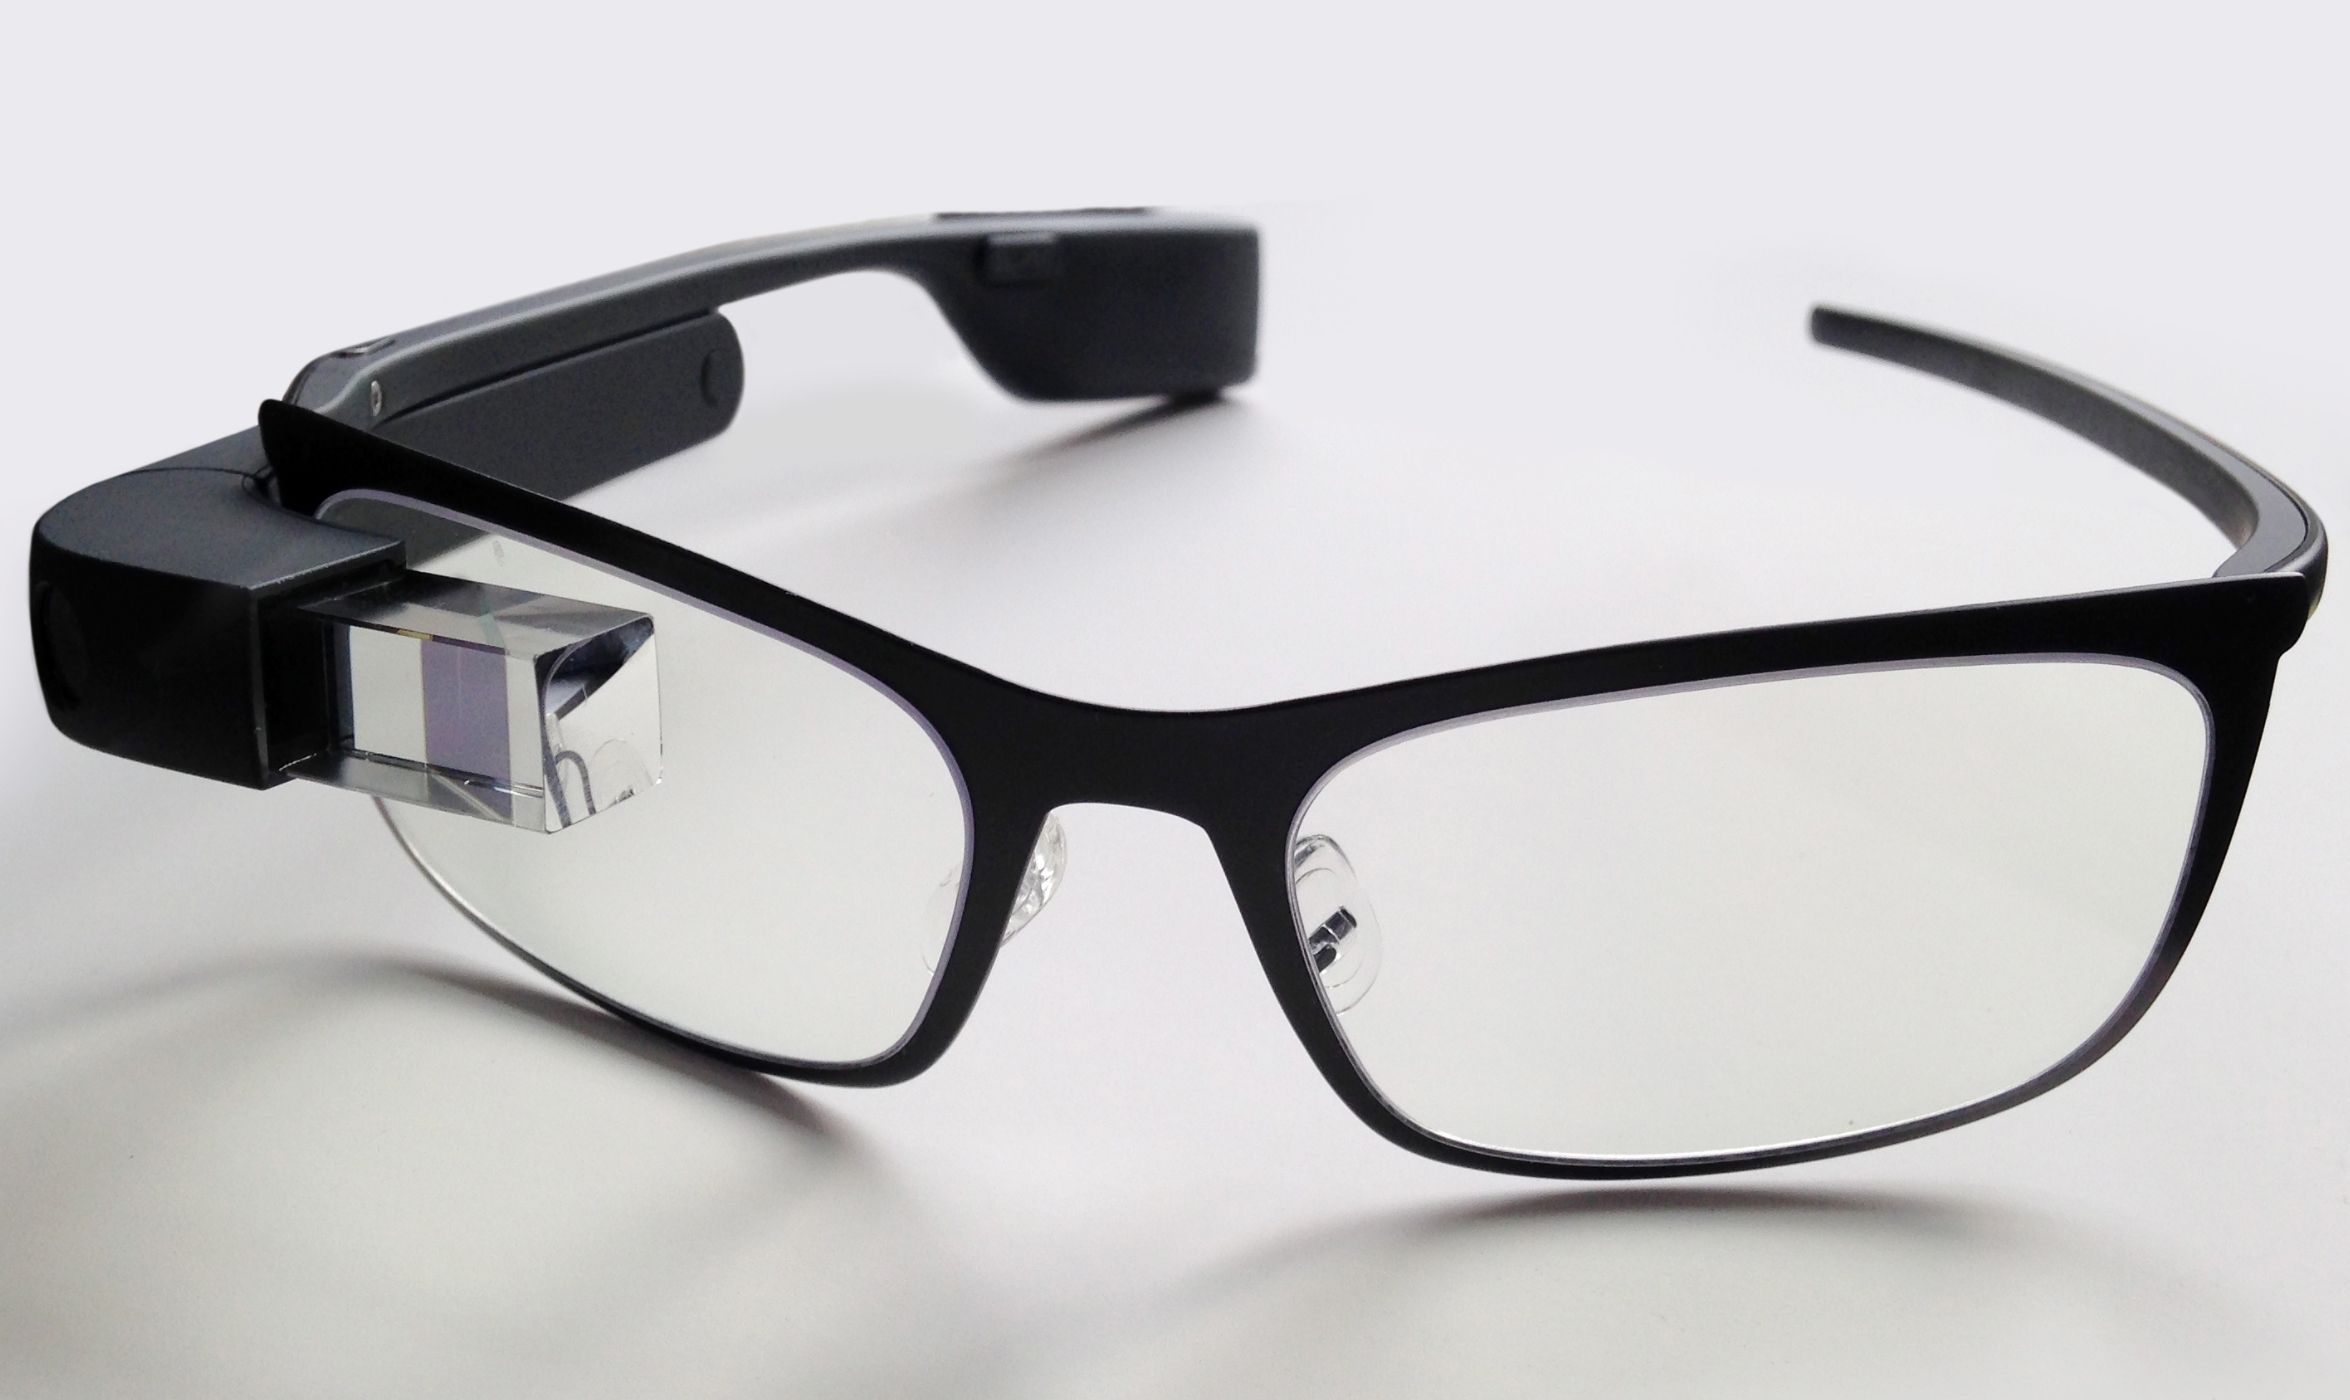 Close up of Google Glass with frame